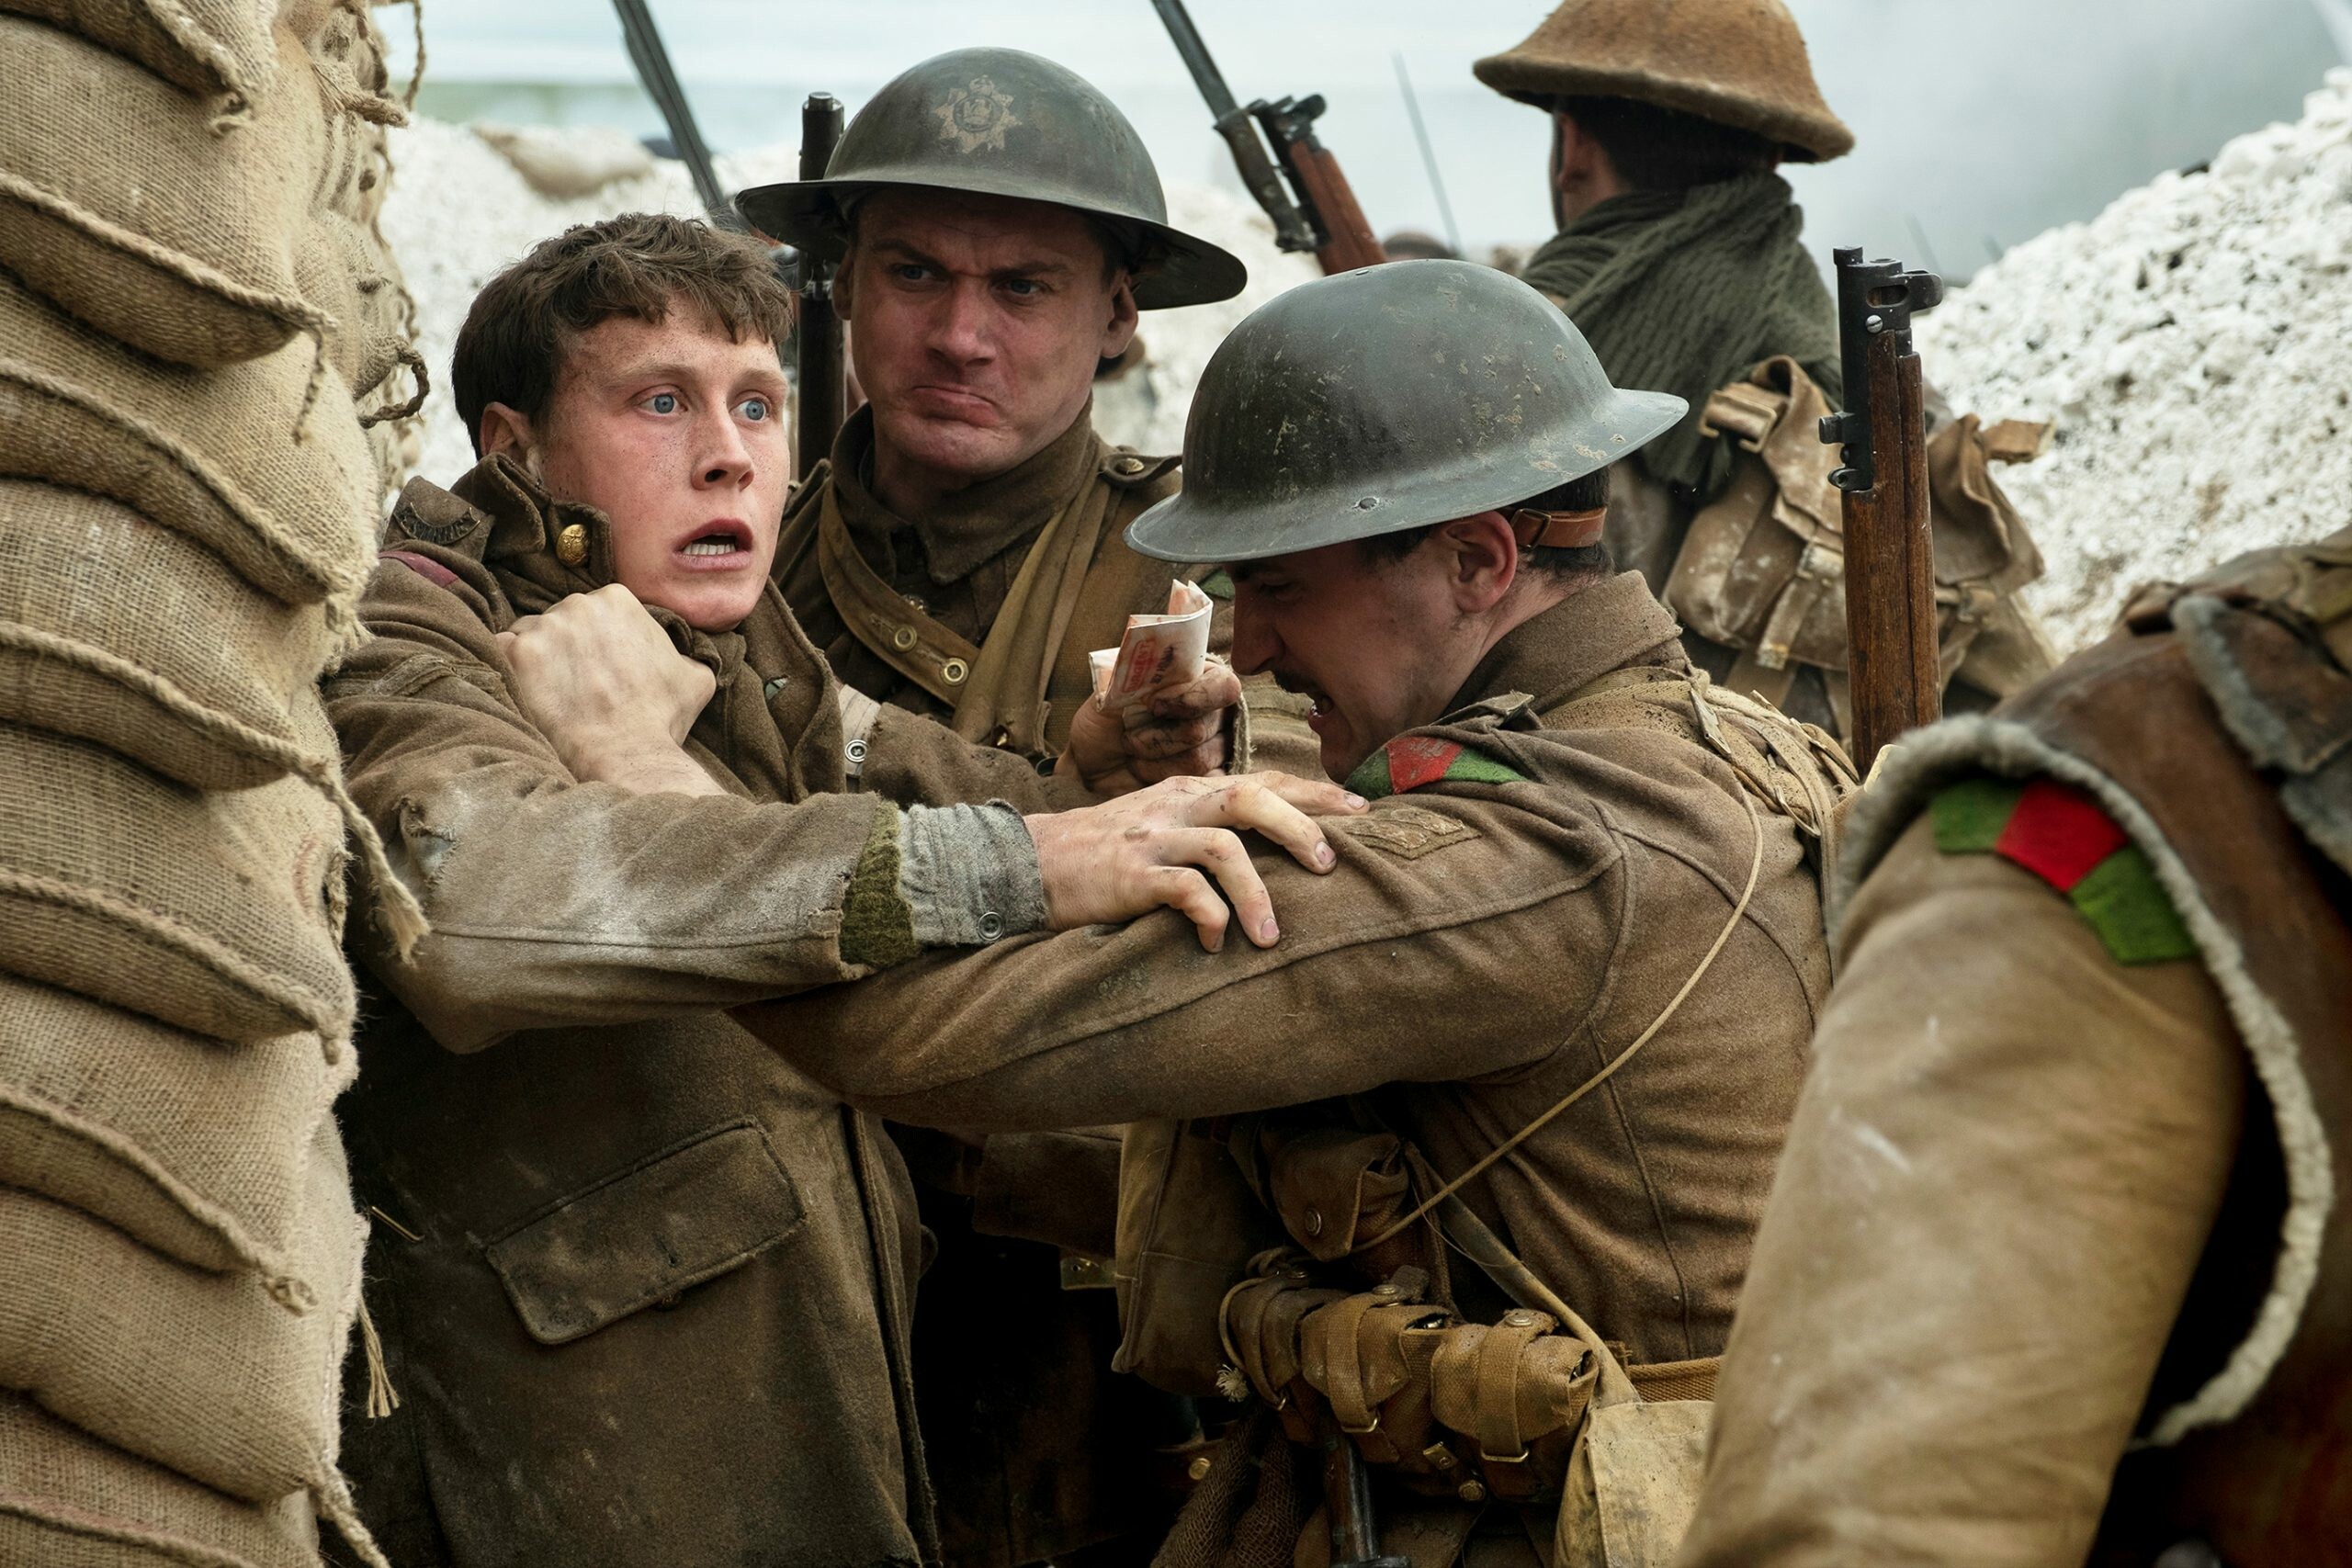 1917 (Movie): George MacKay as Lance Corporal William "Will" Schofield, Sam Mendes. 2560x1710 HD Wallpaper.